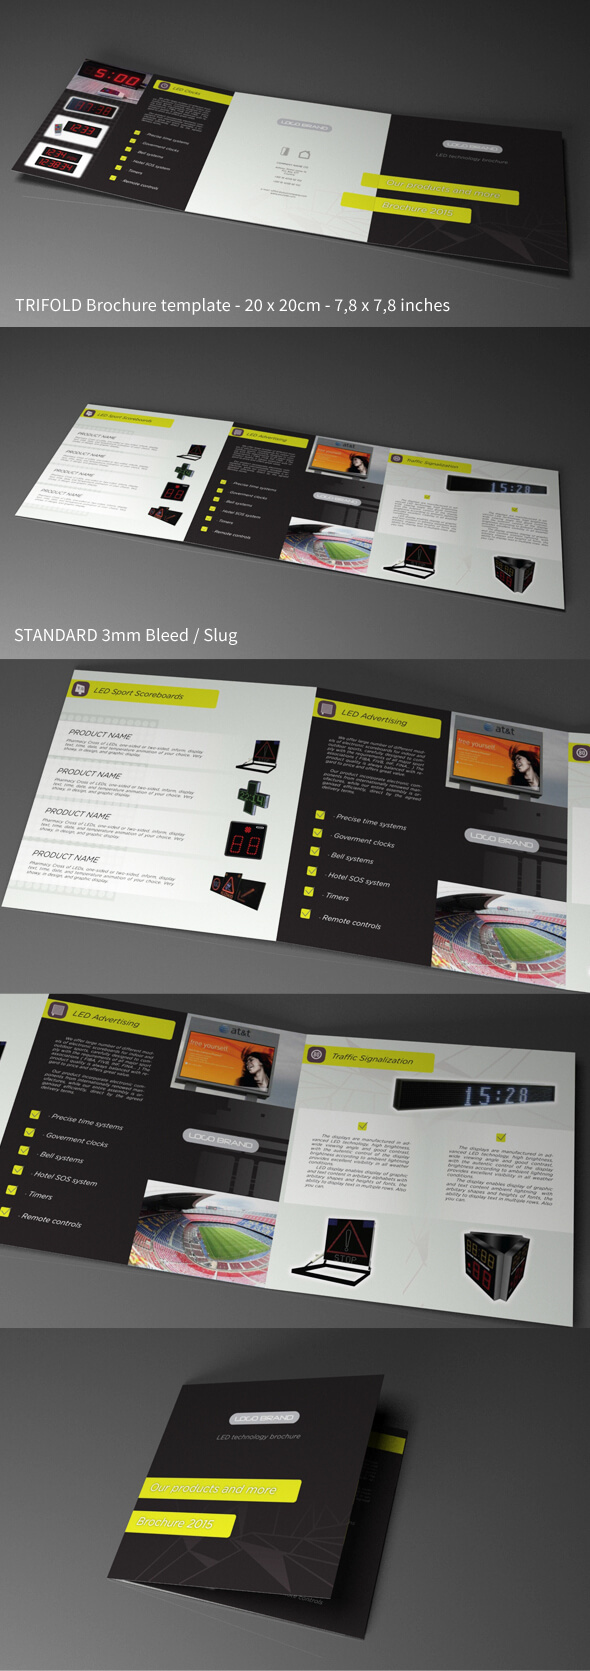 Free Indesign Template - Trifold Square Led Tech On Behance With Regard To Adobe Indesign Tri Fold Brochure Template